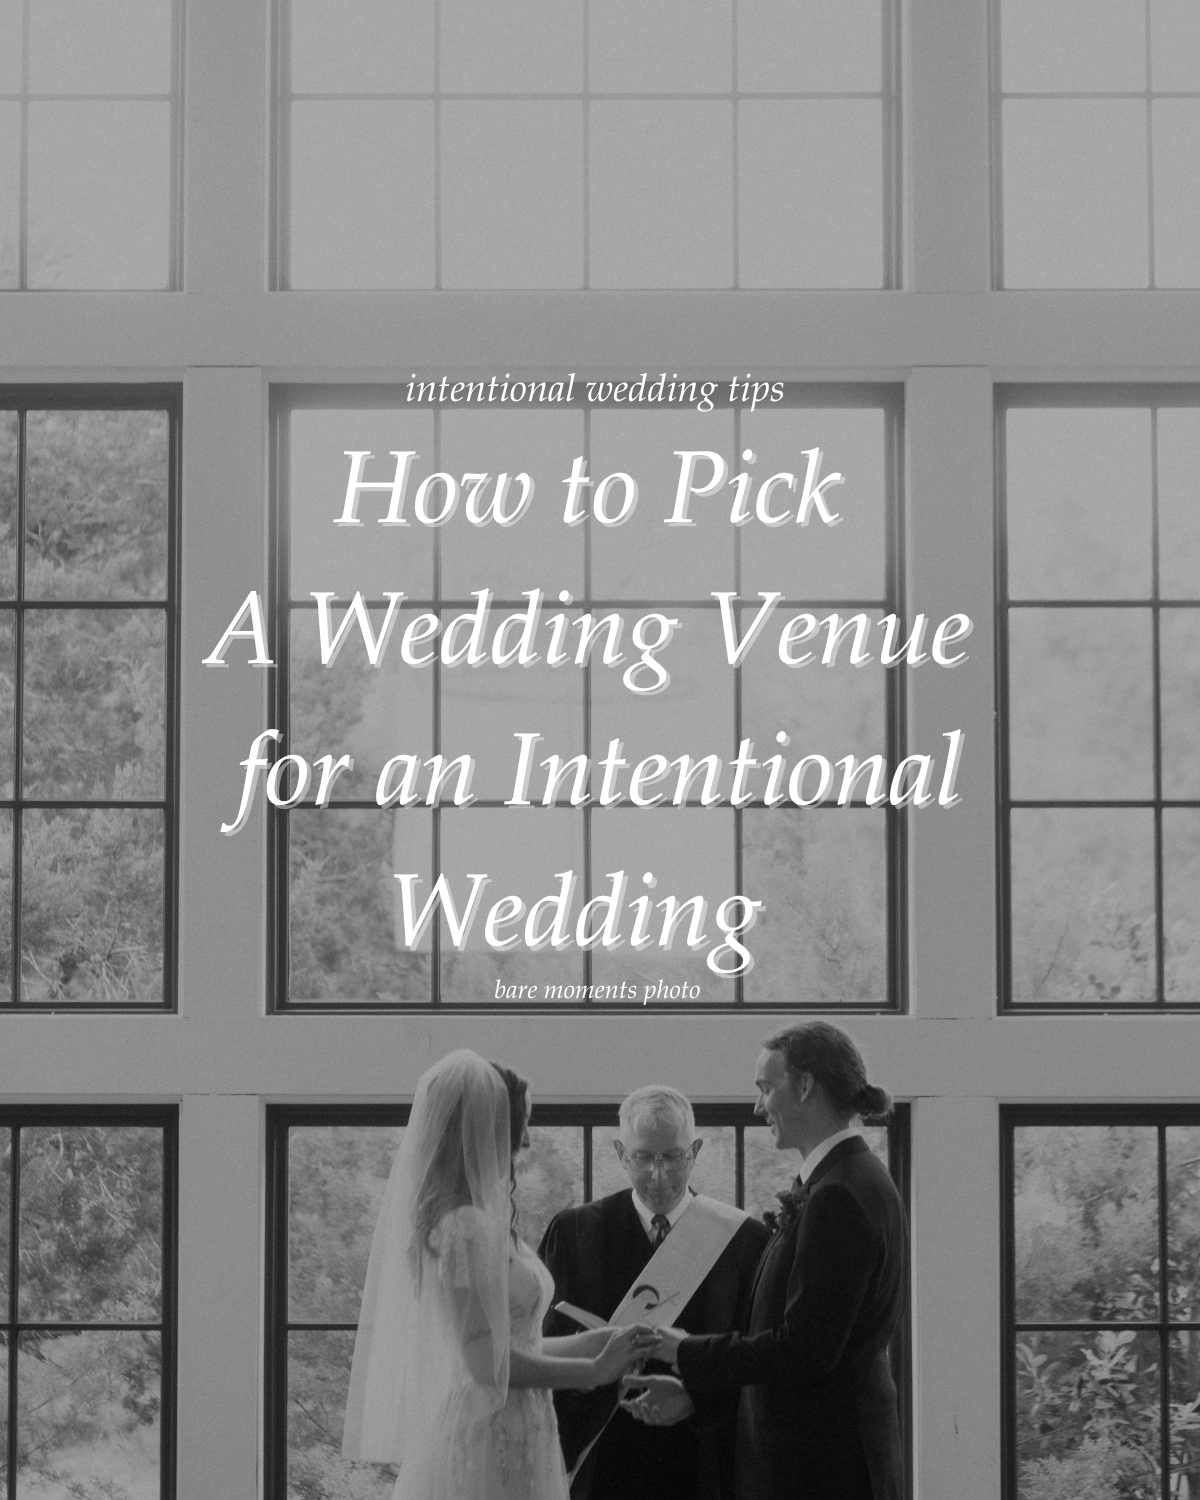 Image of Marriage Ceremony Titled "How to Pick a Wedding Venue for an Intentional Wedding" 